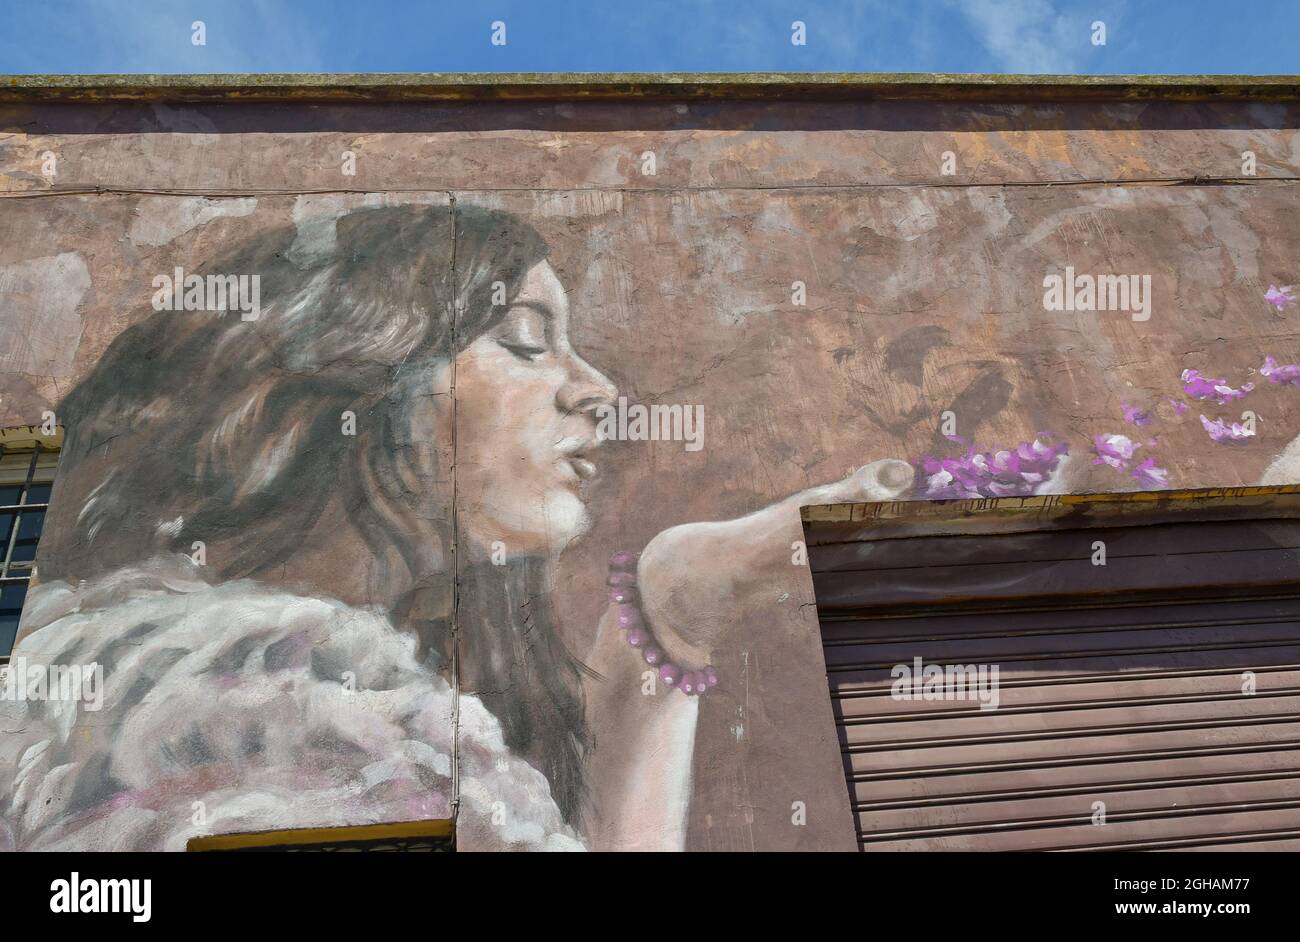 Detail of the mural 'Wisteria flowers' by the street artist Ligama on the wall of an old building in the New Venice district, Livorno, Tuscany, Italy Stock Photo